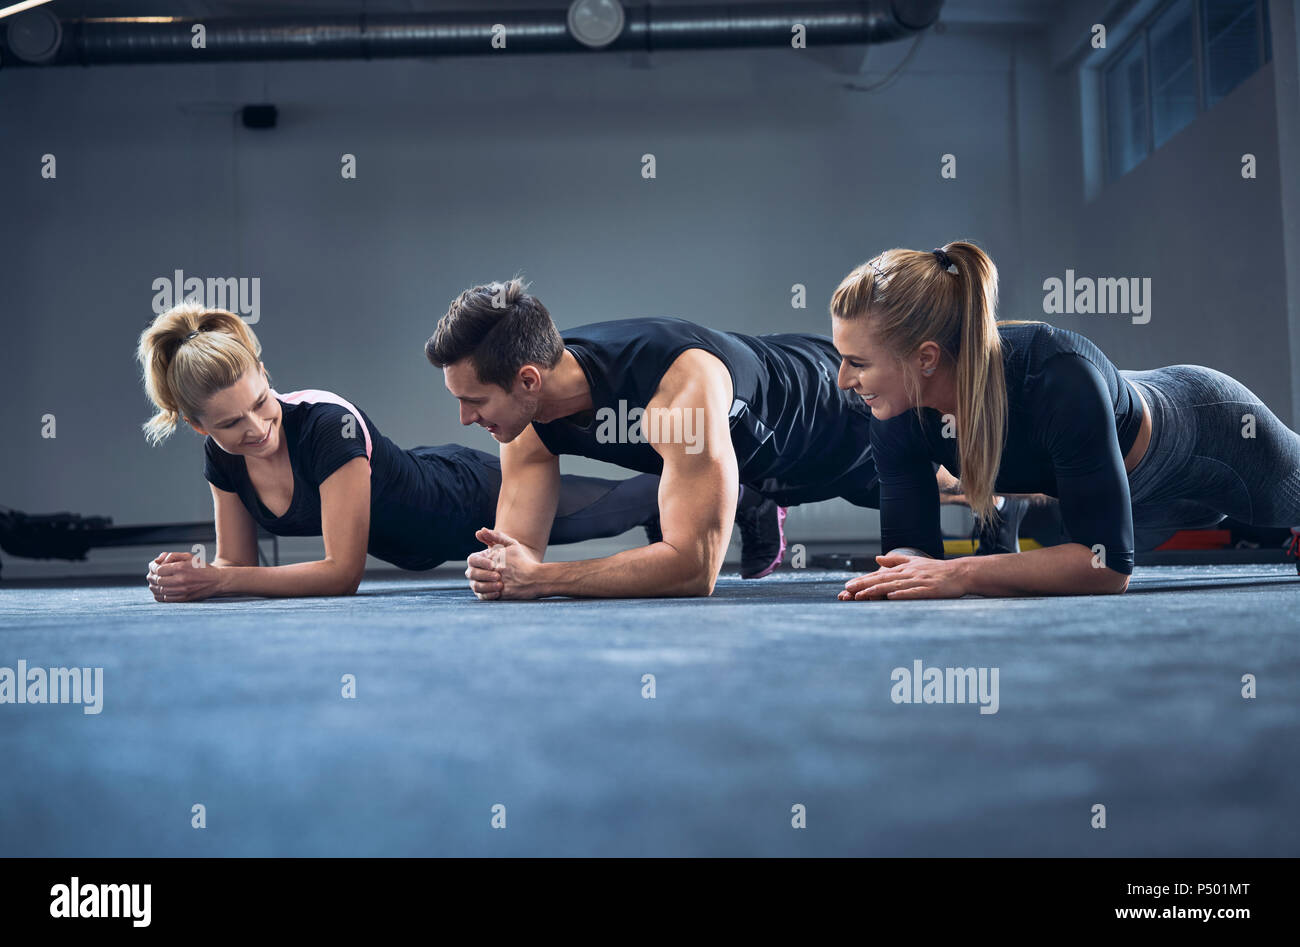 Three people doing plank exercise at gym Stock Photo